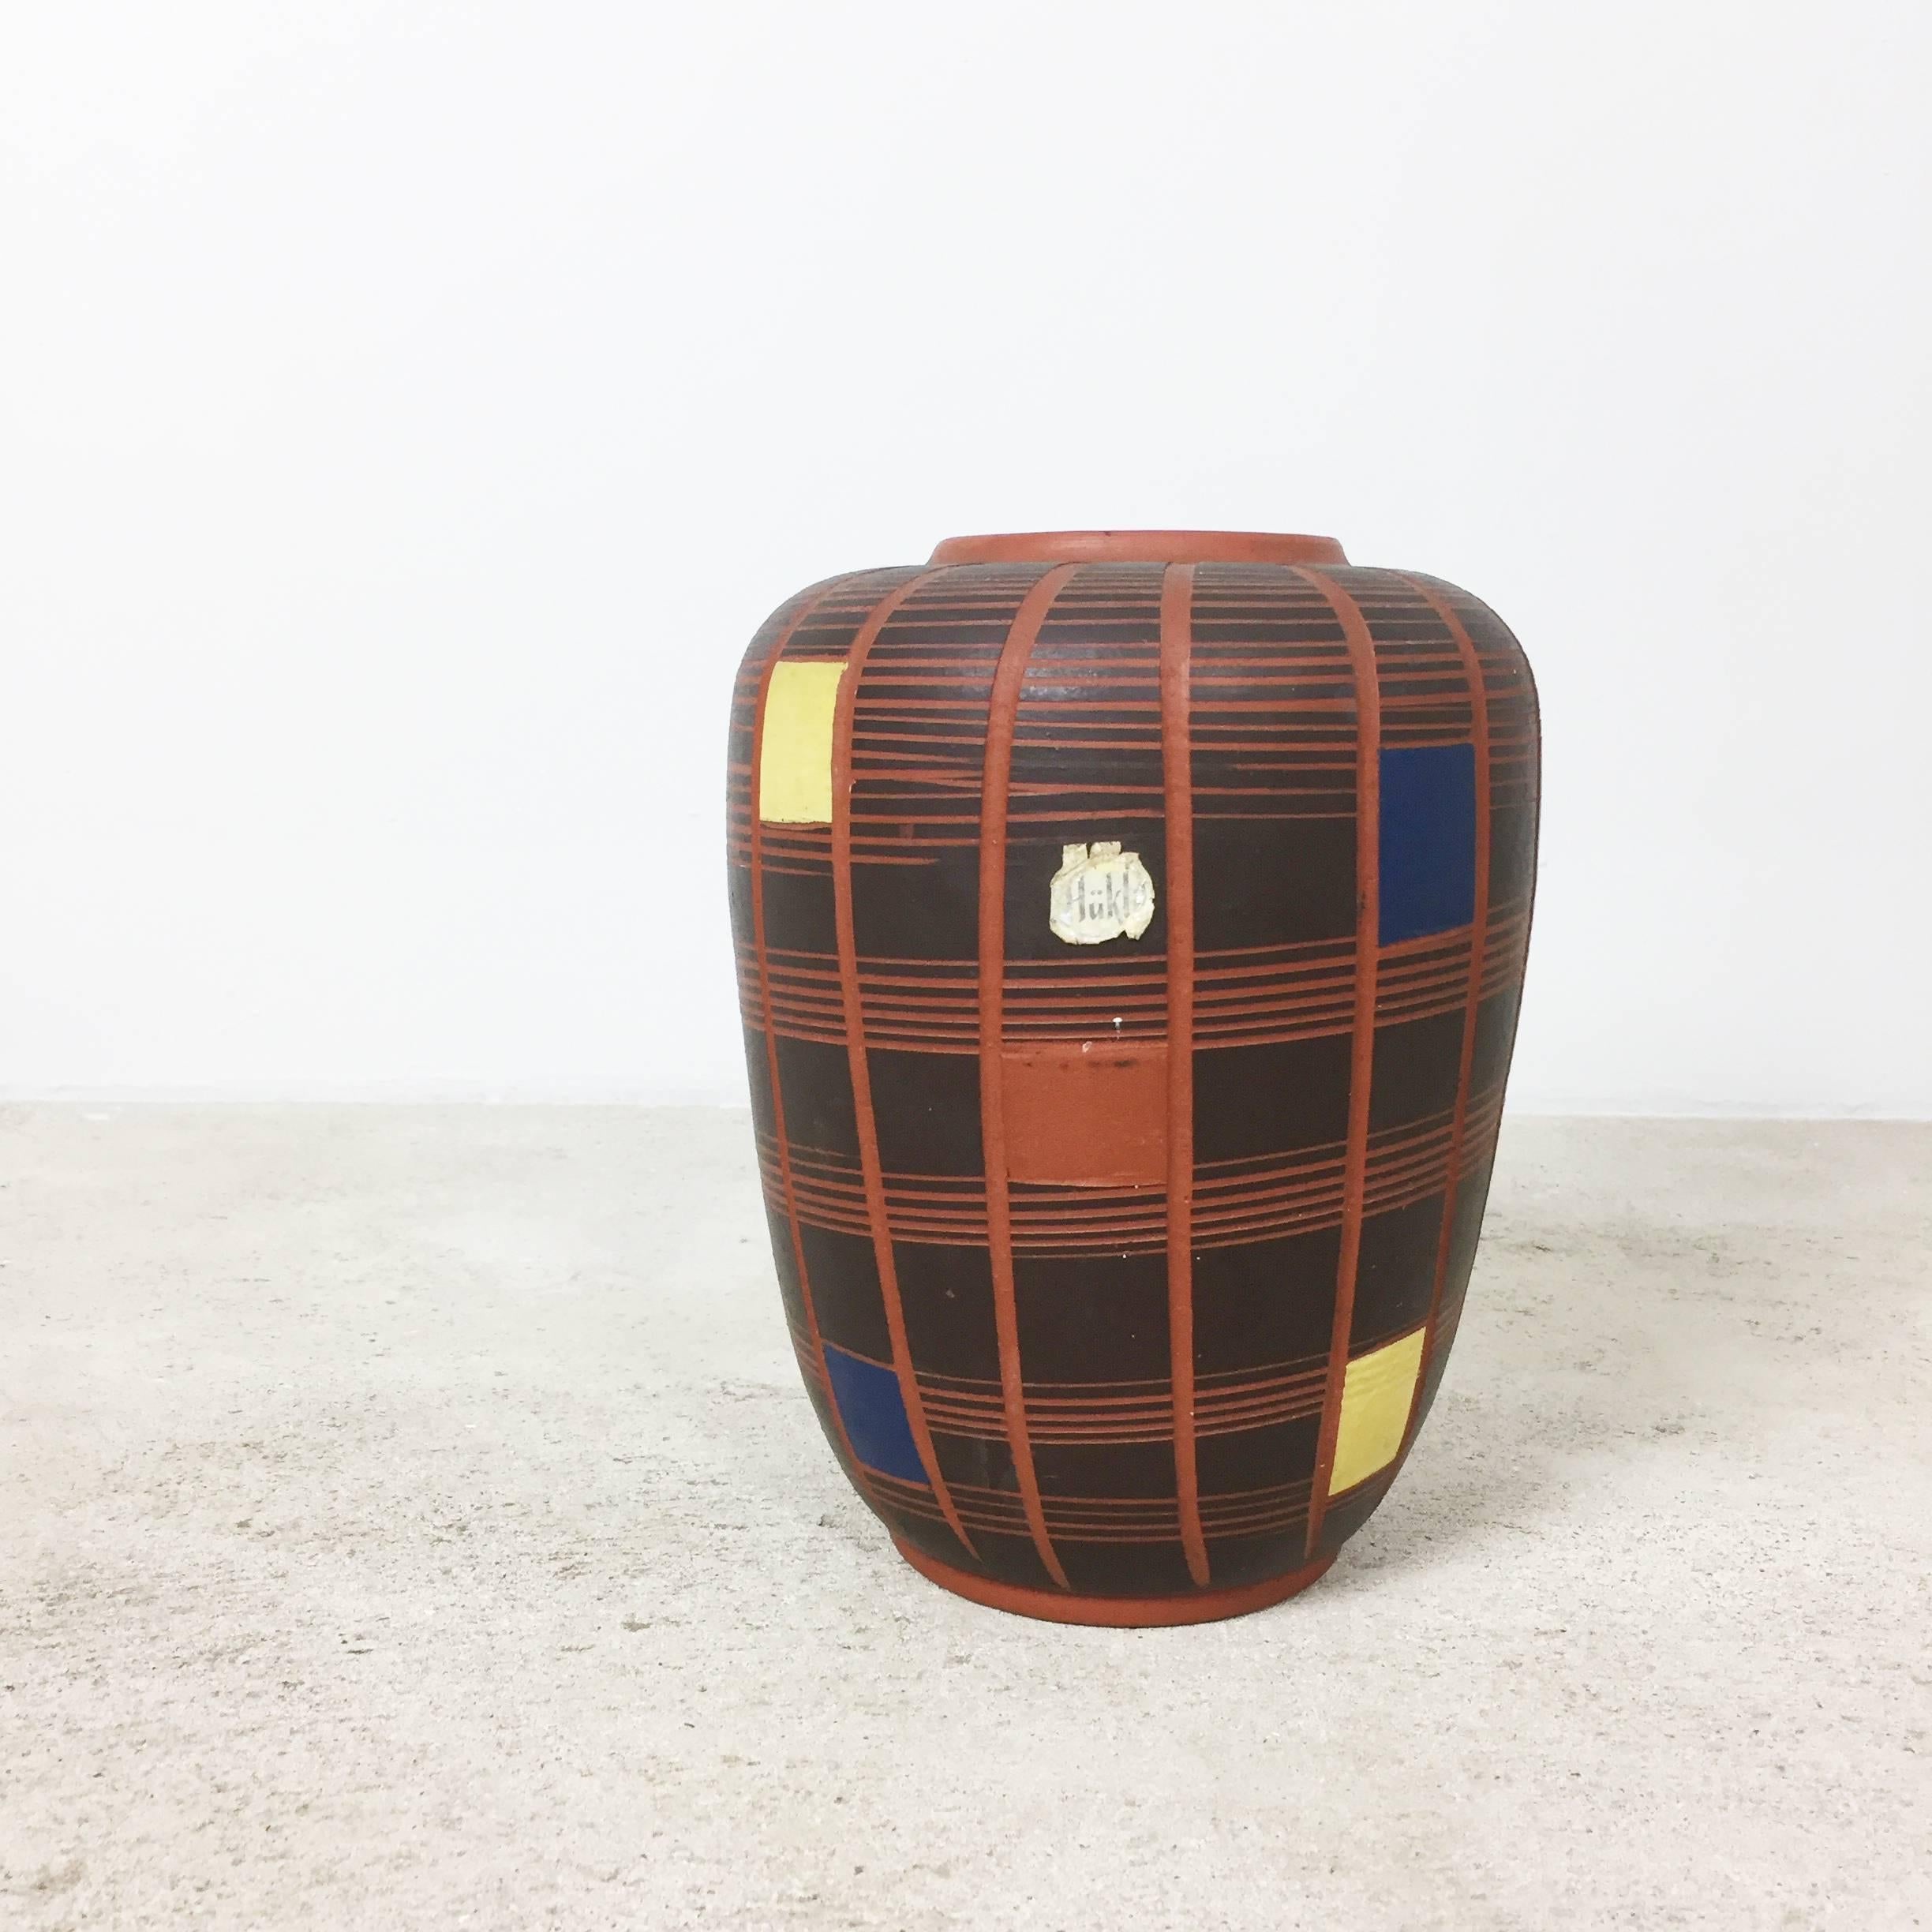 Article:

Pottery ceramic vase


Producer:

Hükli Ceramic, Germany


Decade:

1960s

Original vintage 1960s pottery ceramic vase made in Germany. High quality German production with a nice abstract painting and coloration. The vase was